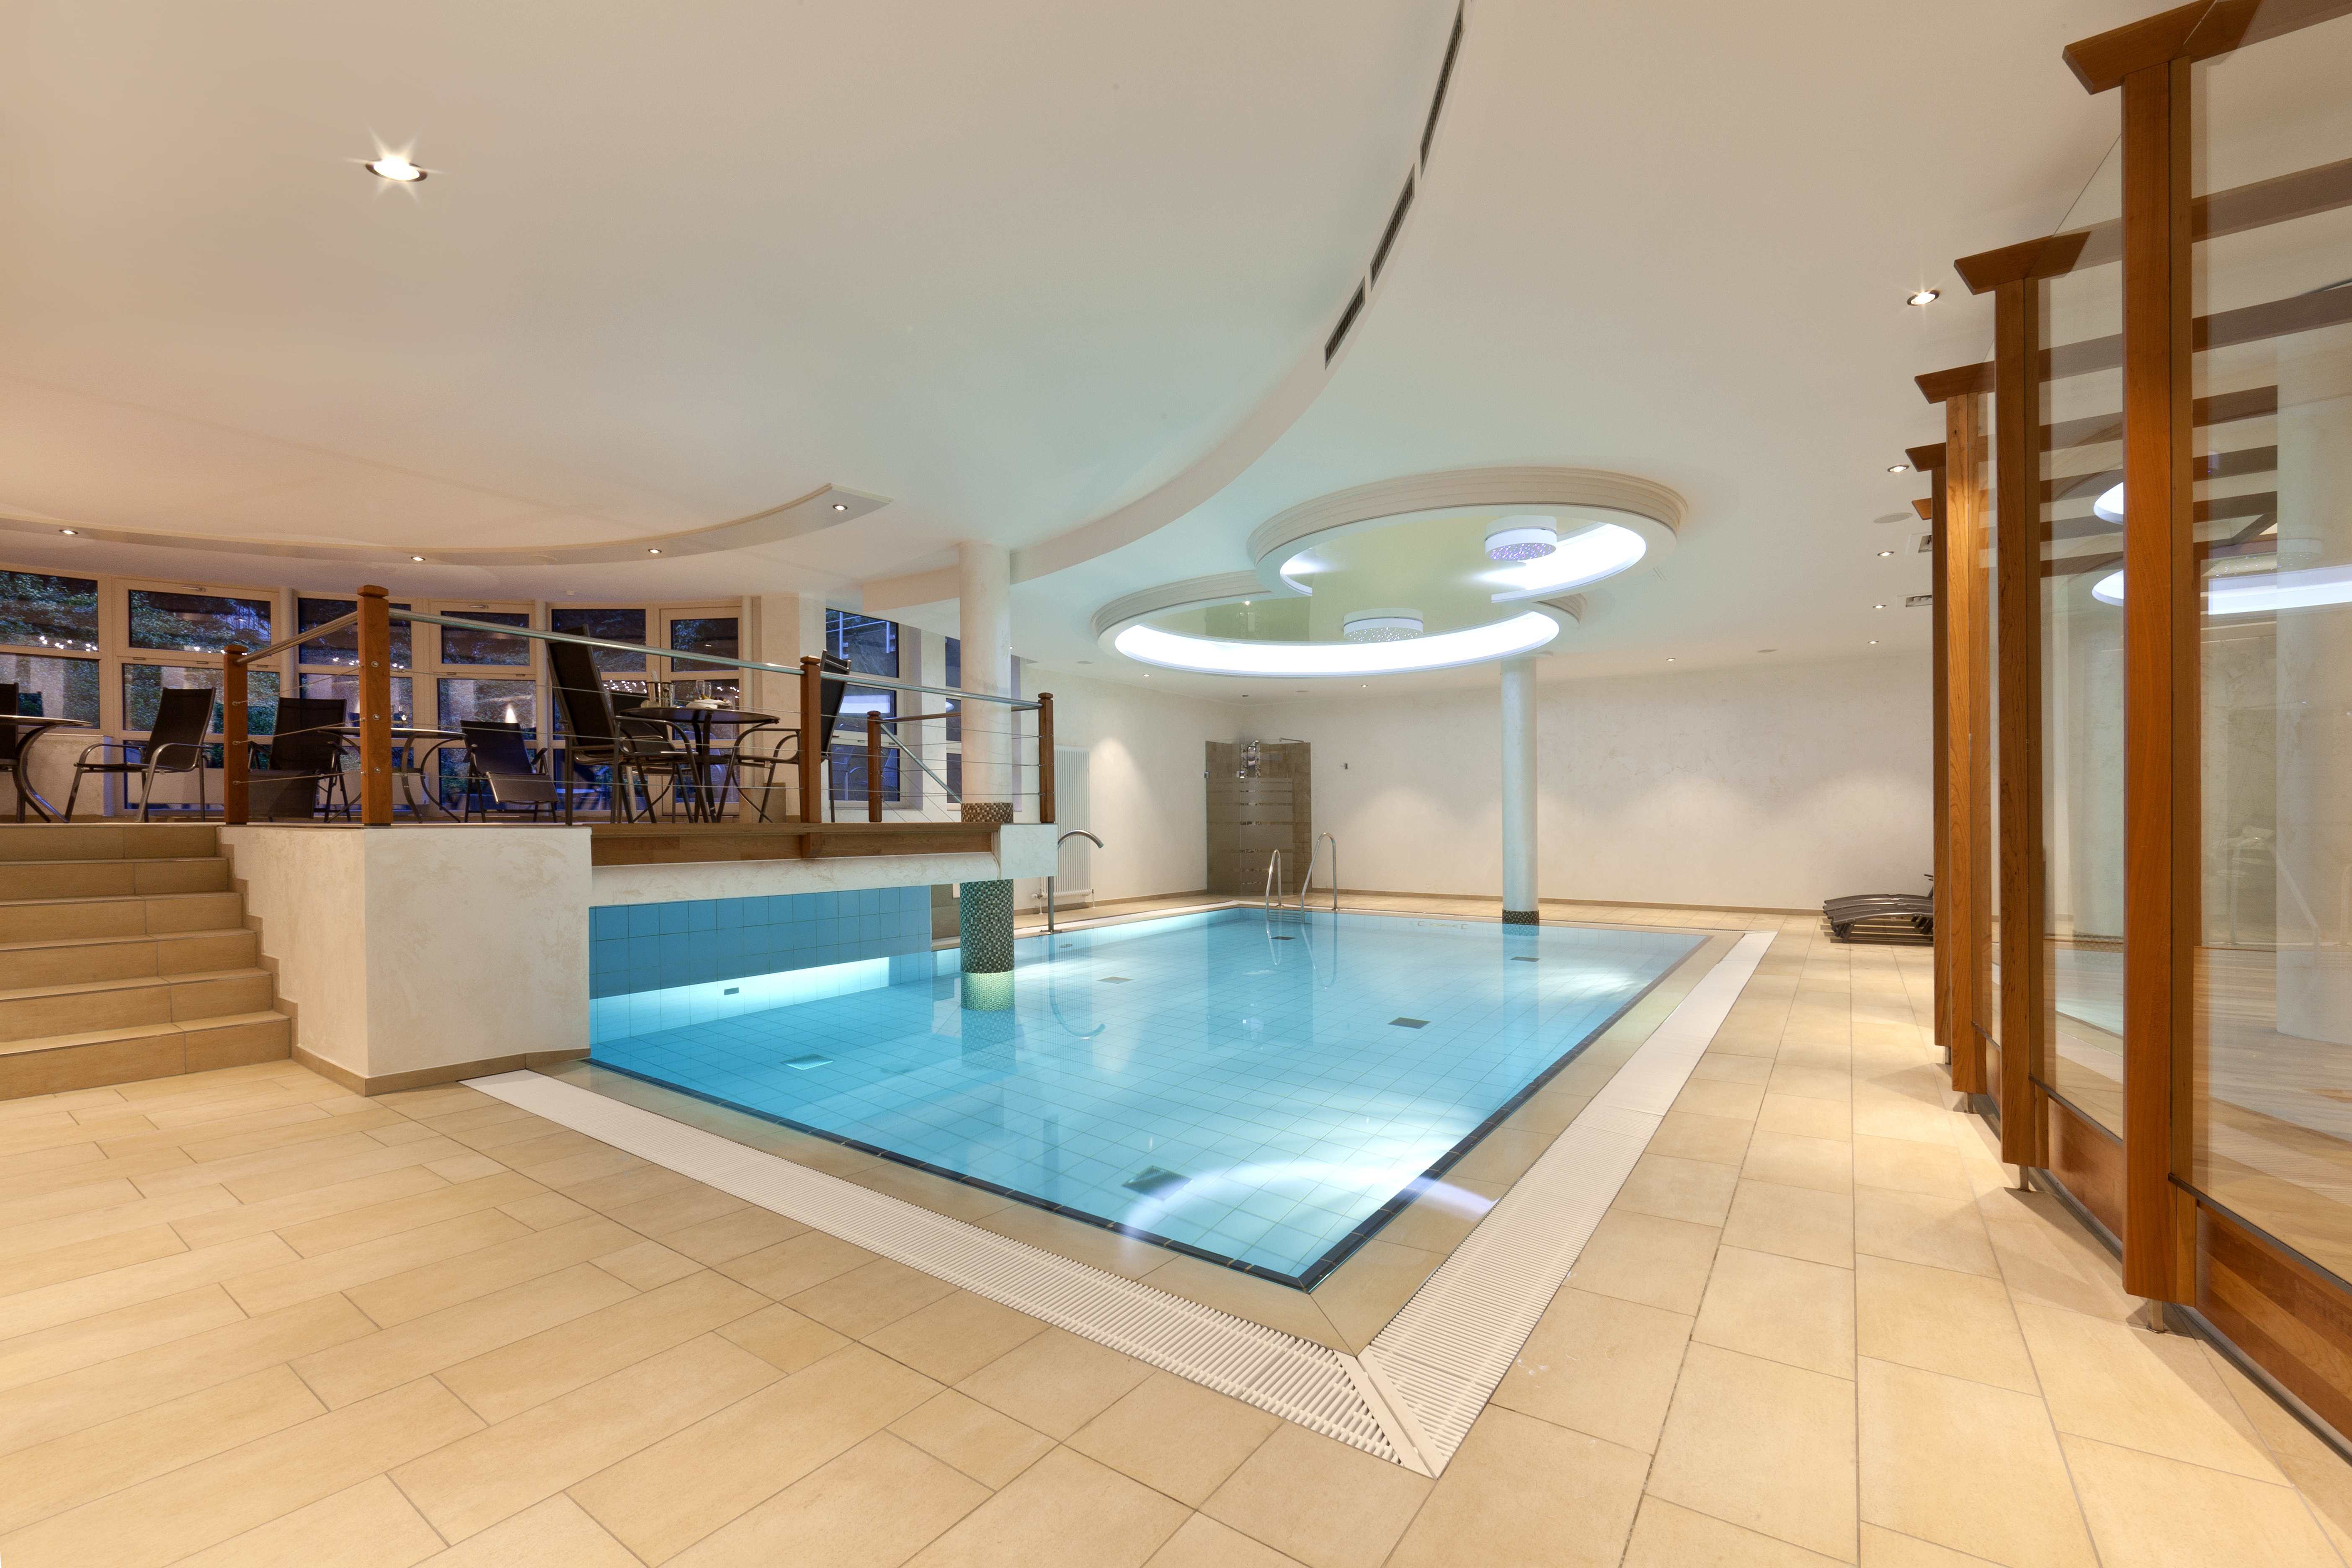 Attractive designed pool area in the 4-star hotel Ringhotel Am Stadtpark in Luenen